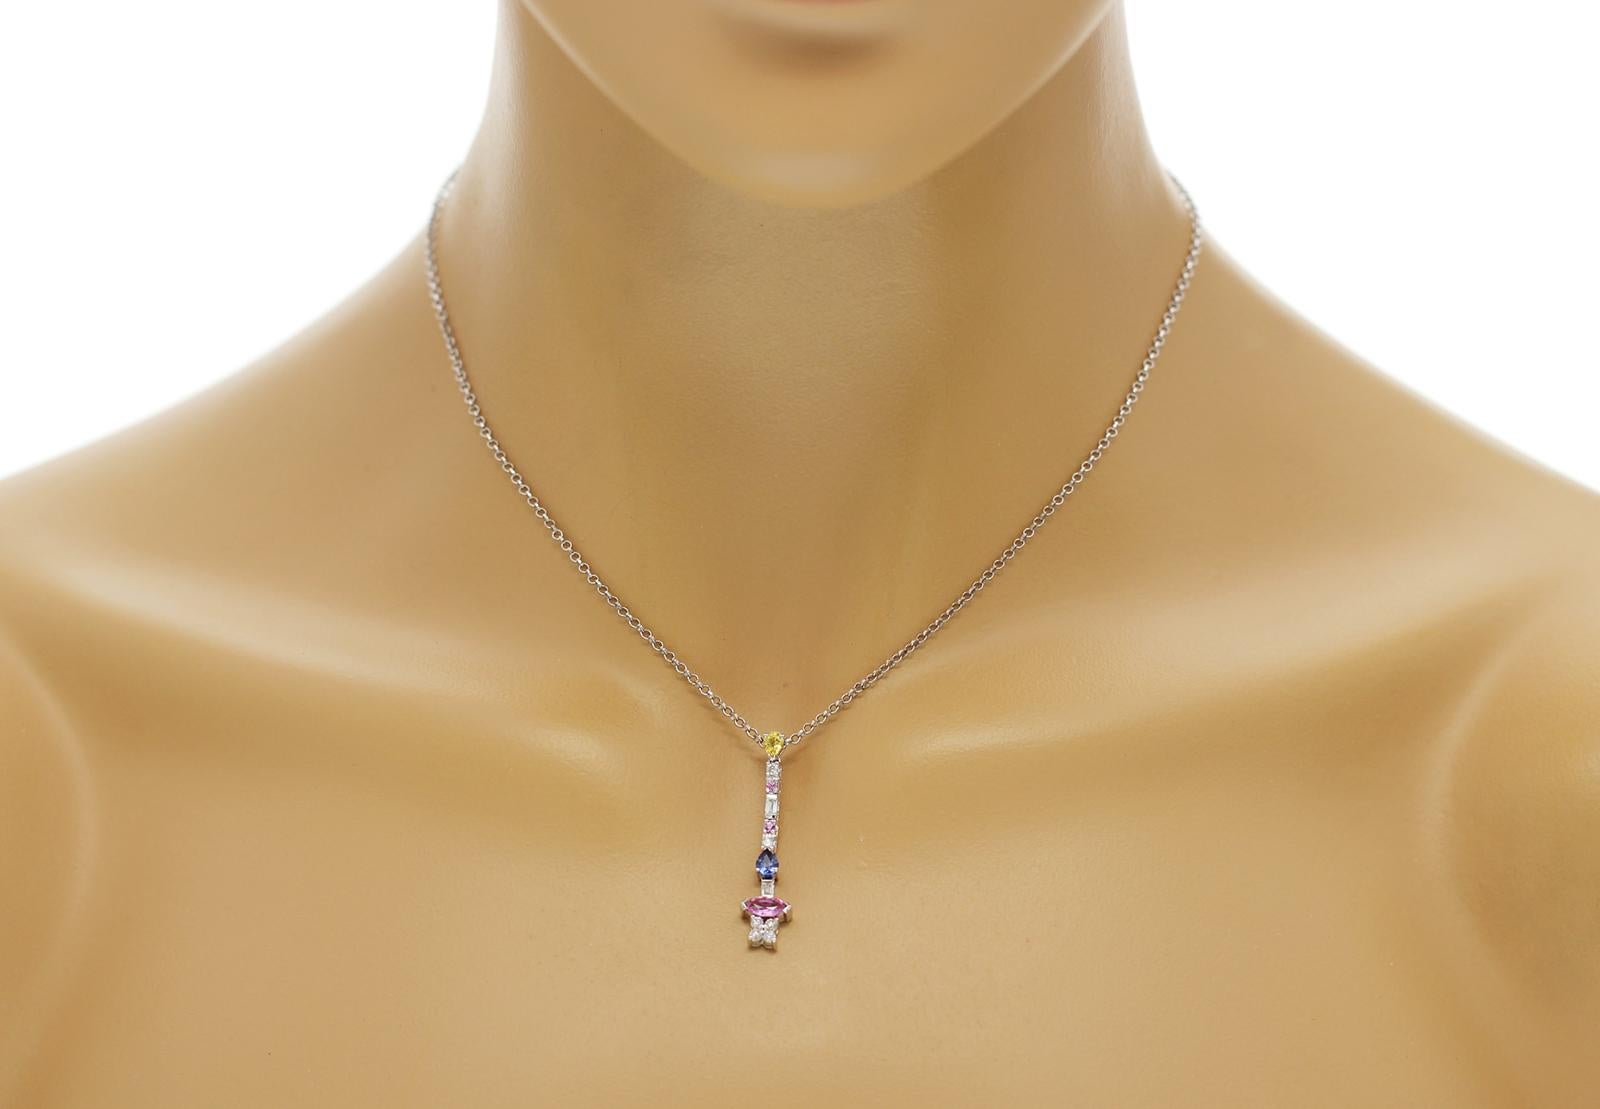 100% Authentic, 100% Customer Satisfaction

Pendant: 34 mm

Chain: 8 mm

Size: 16 Inches

Metal: 18K White Gold

Hallmarks: 18K

Total Weight: 1.68 Grams

Stone Type: 1.64 CT Natural Sapphire &  Diamond 0.32 CT  G   SI1

Condition: New With Tag